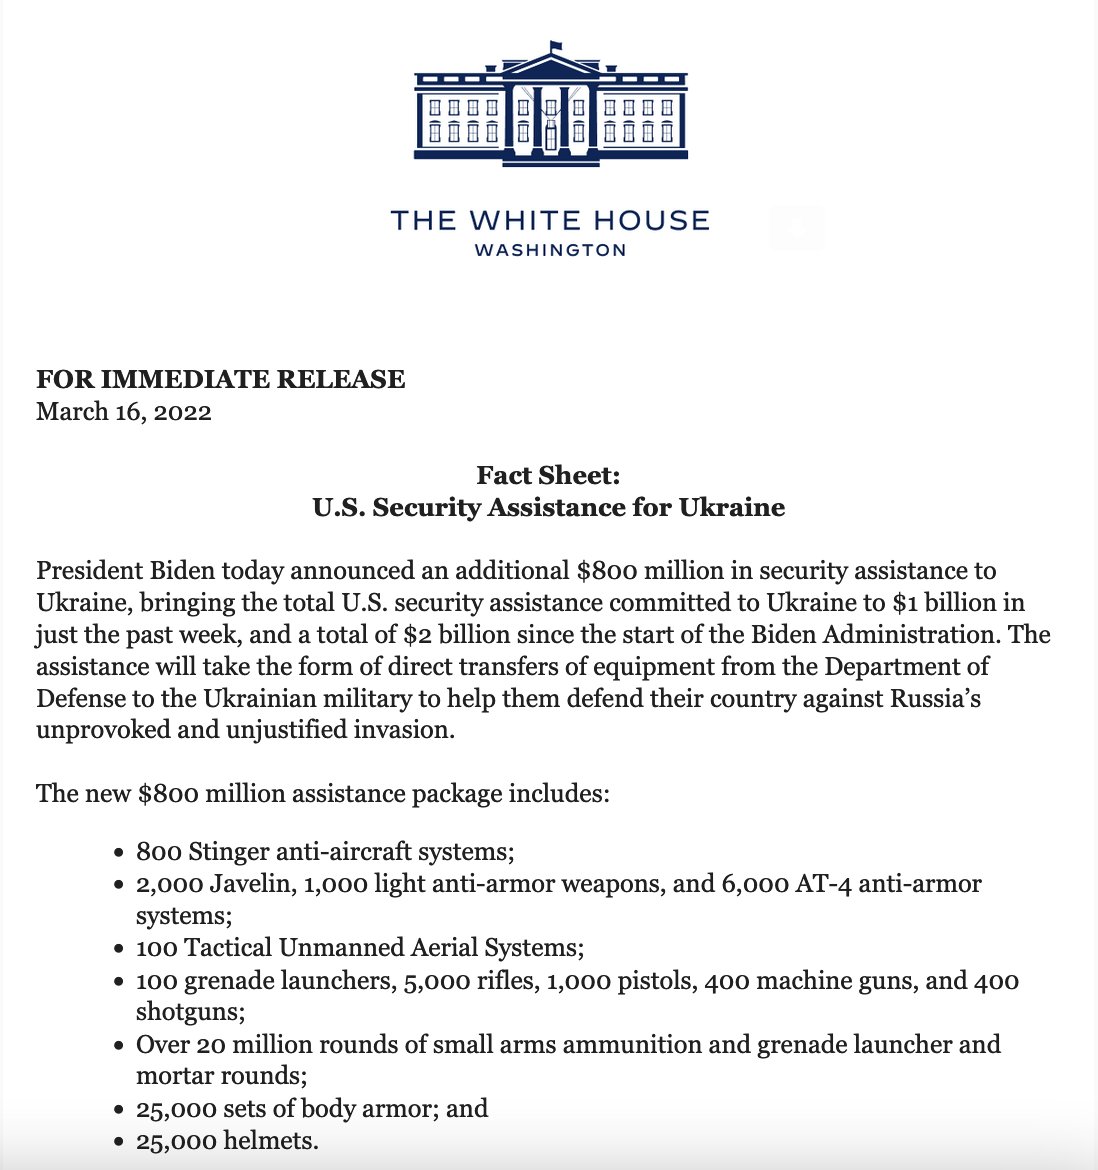 White House on the new $800 million assistance package